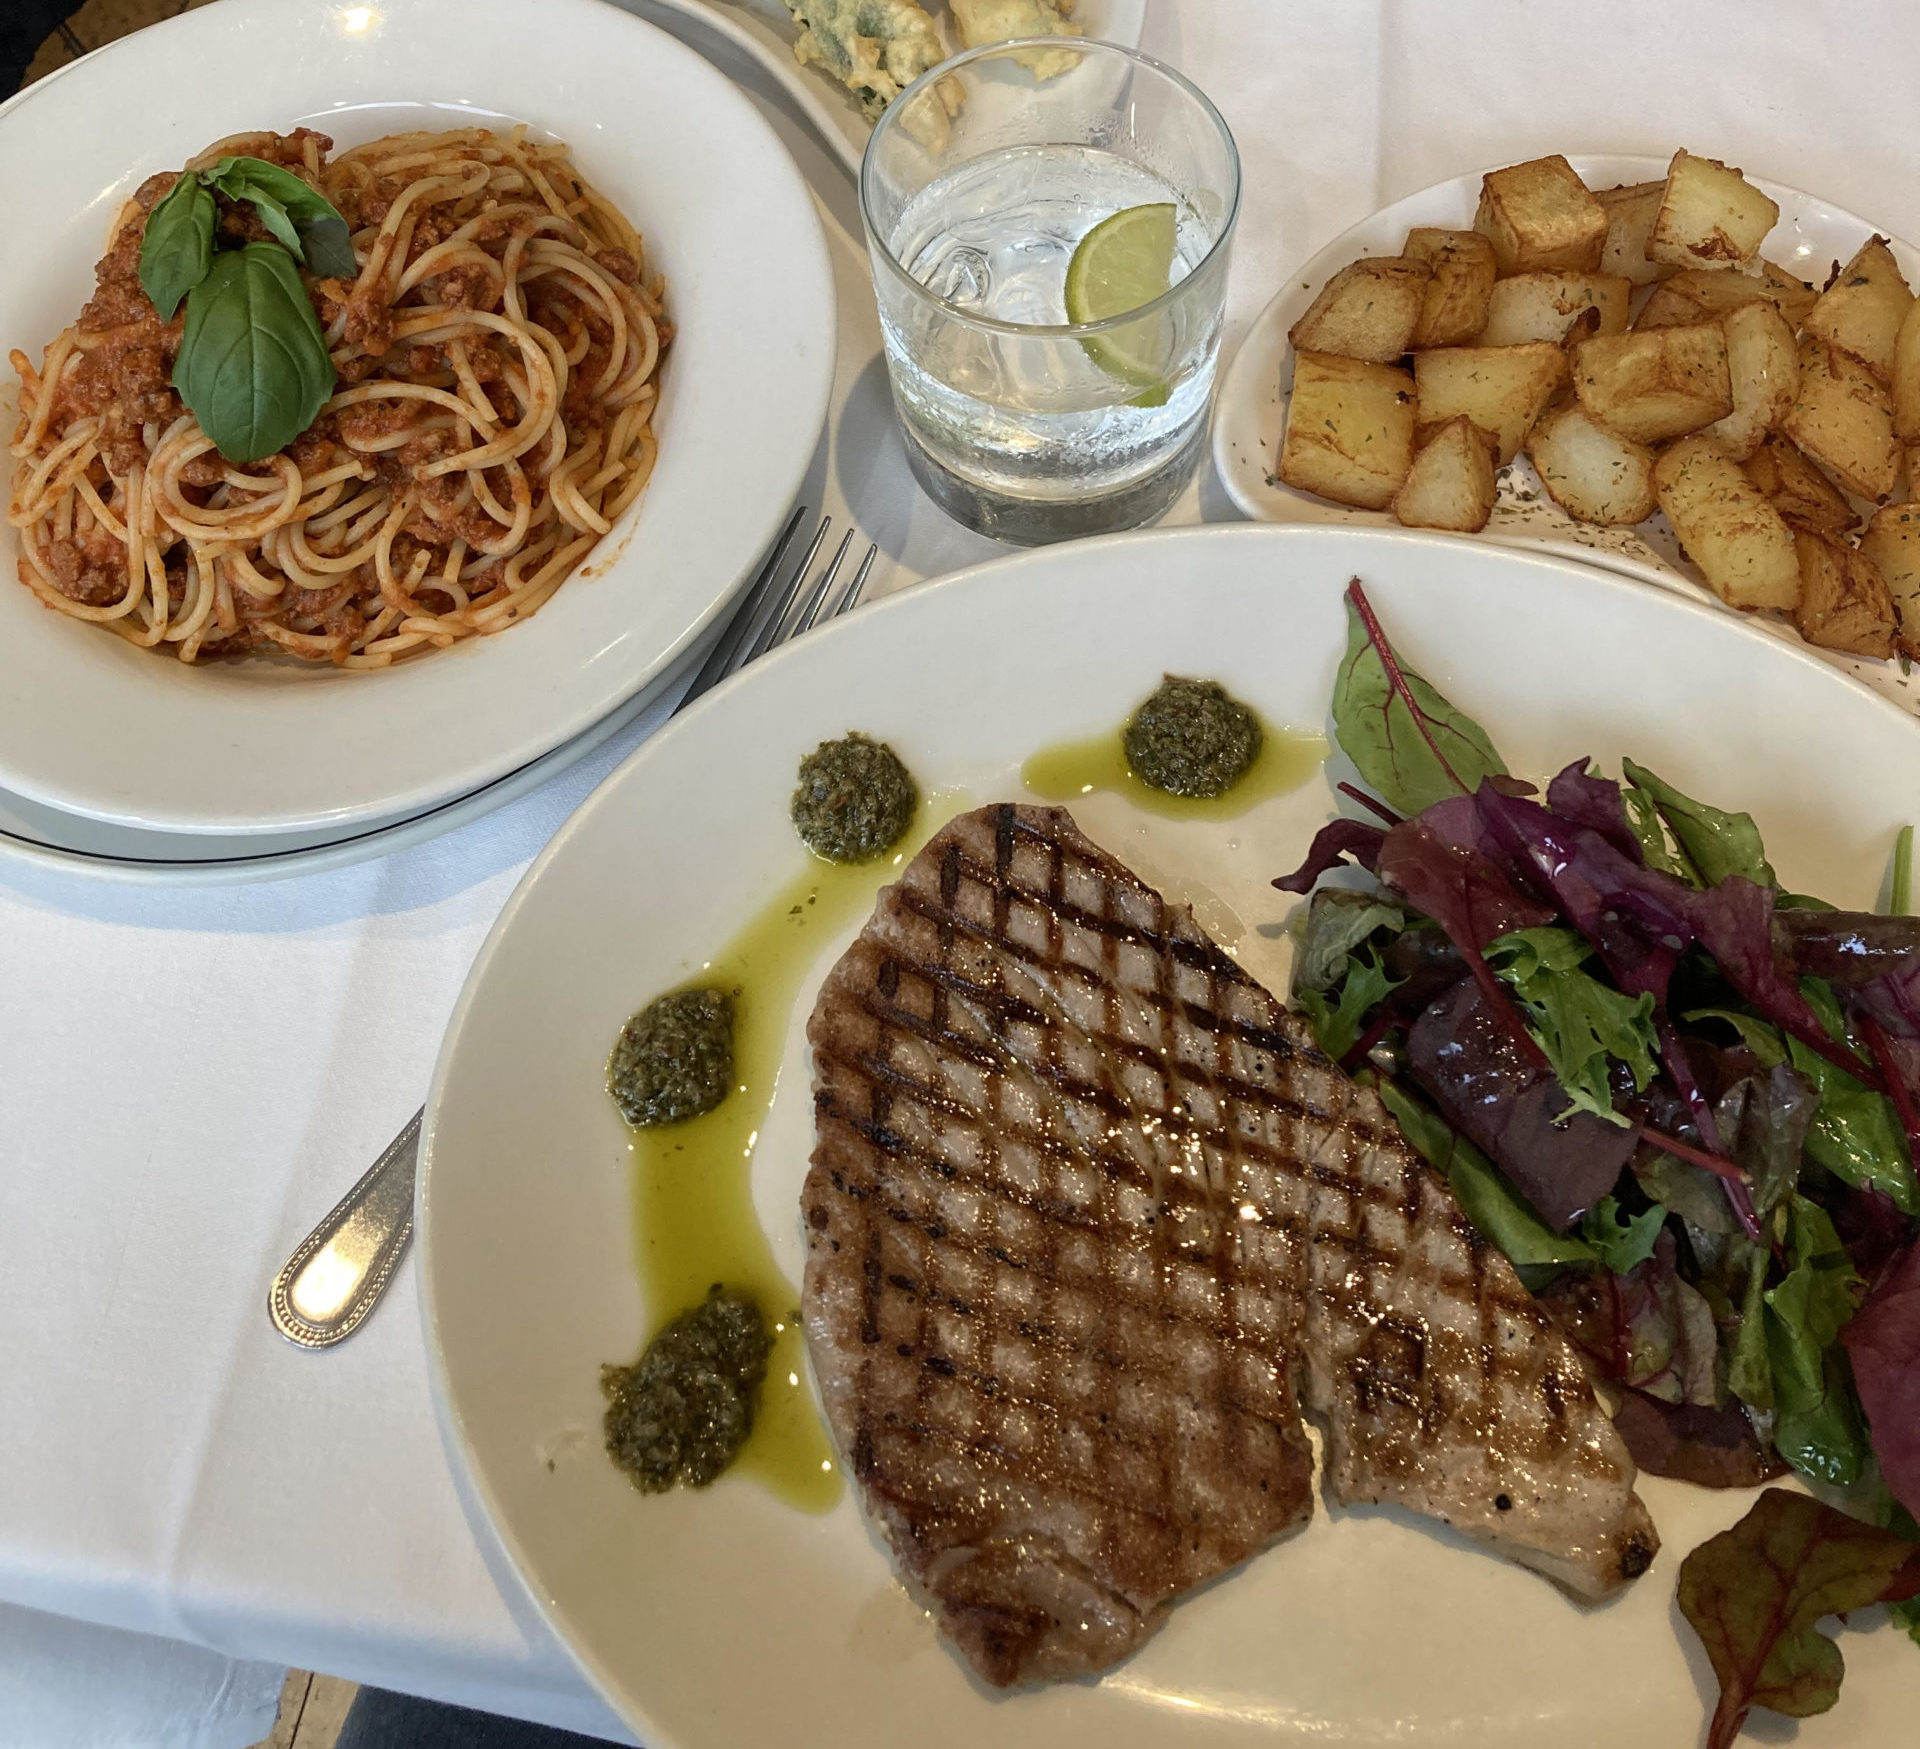 A table set with plates offering spaghetti in tomato sauce, potatoes and a steak with a salad.